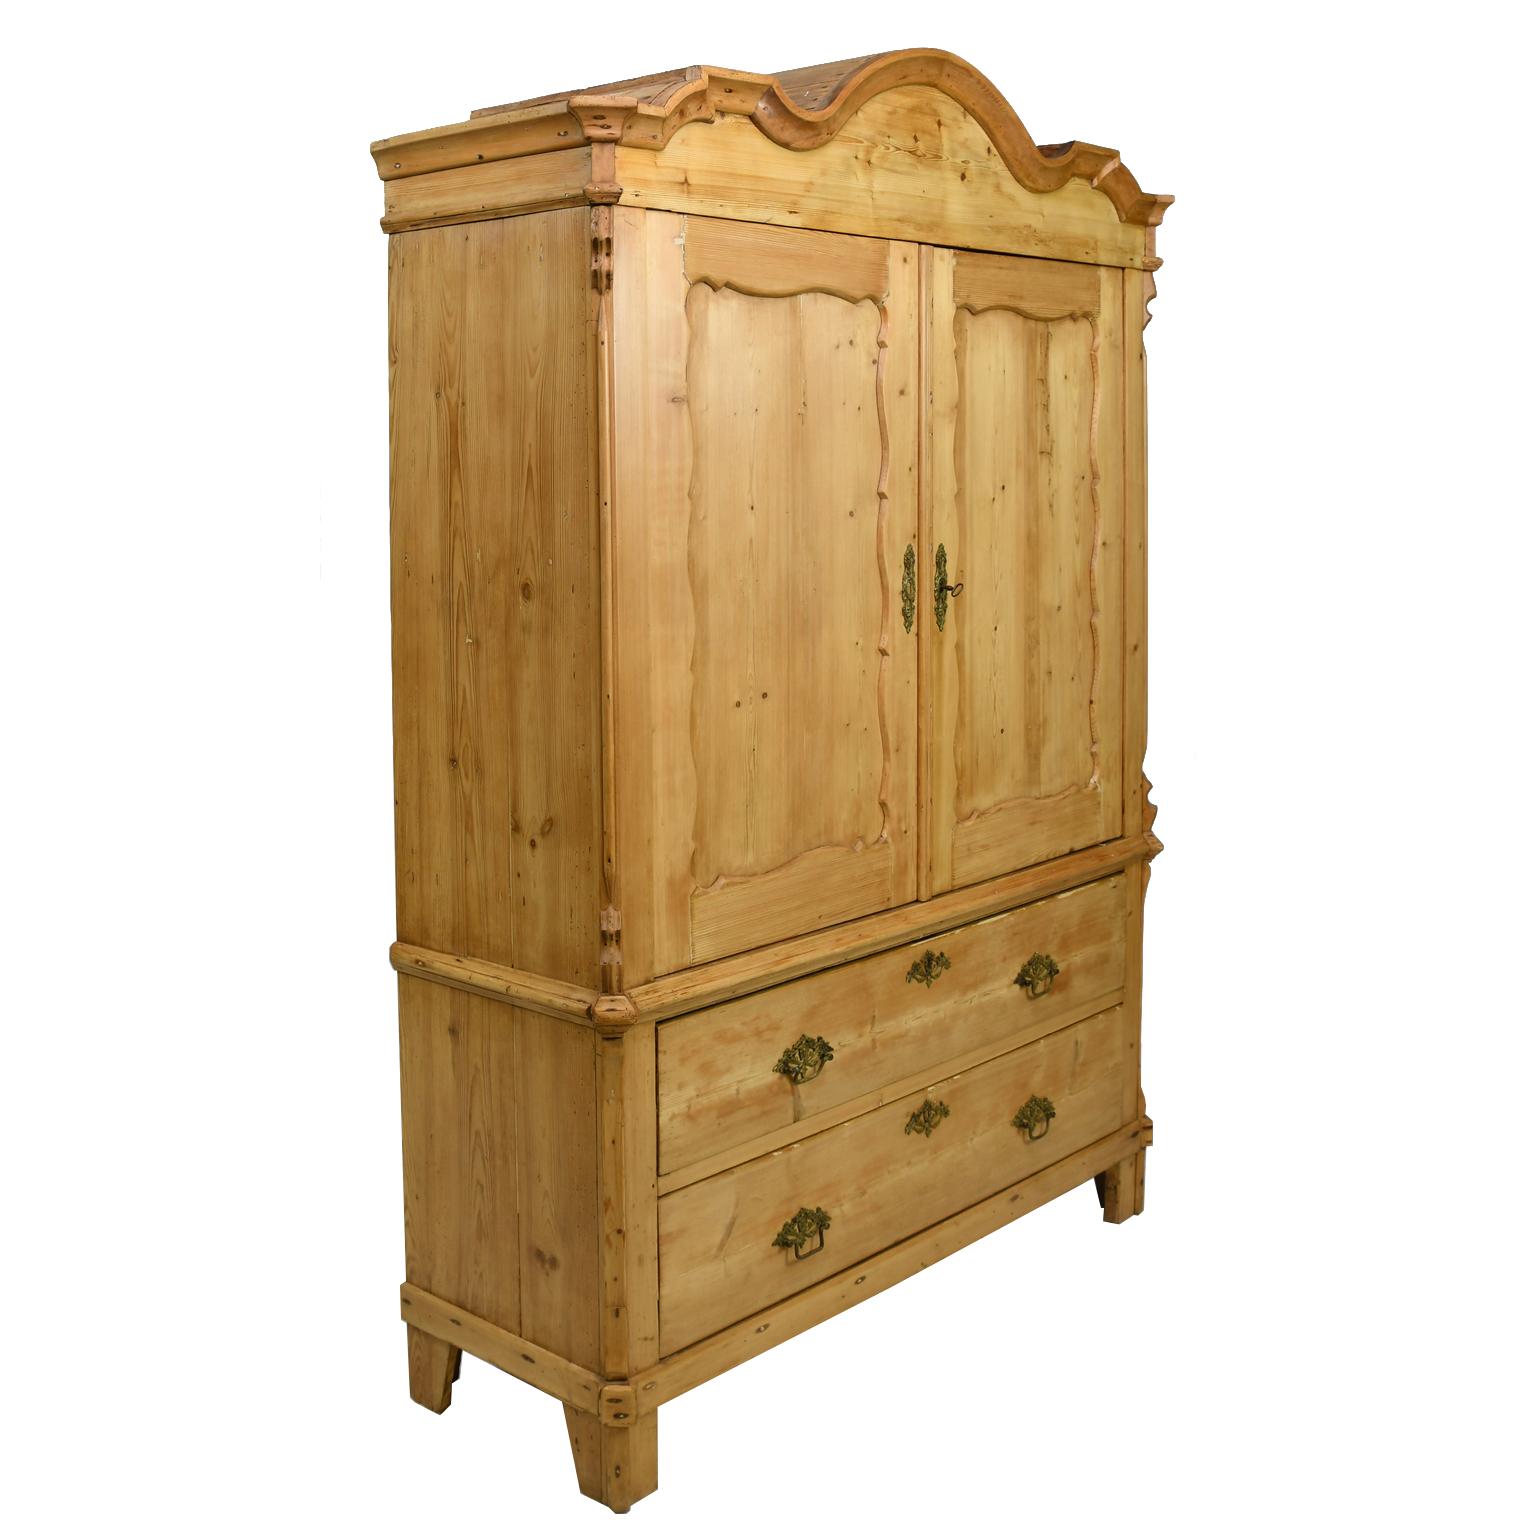 Hand-Carved Antique William I Dutch Kast or Linen Press in Pine, circa 1820